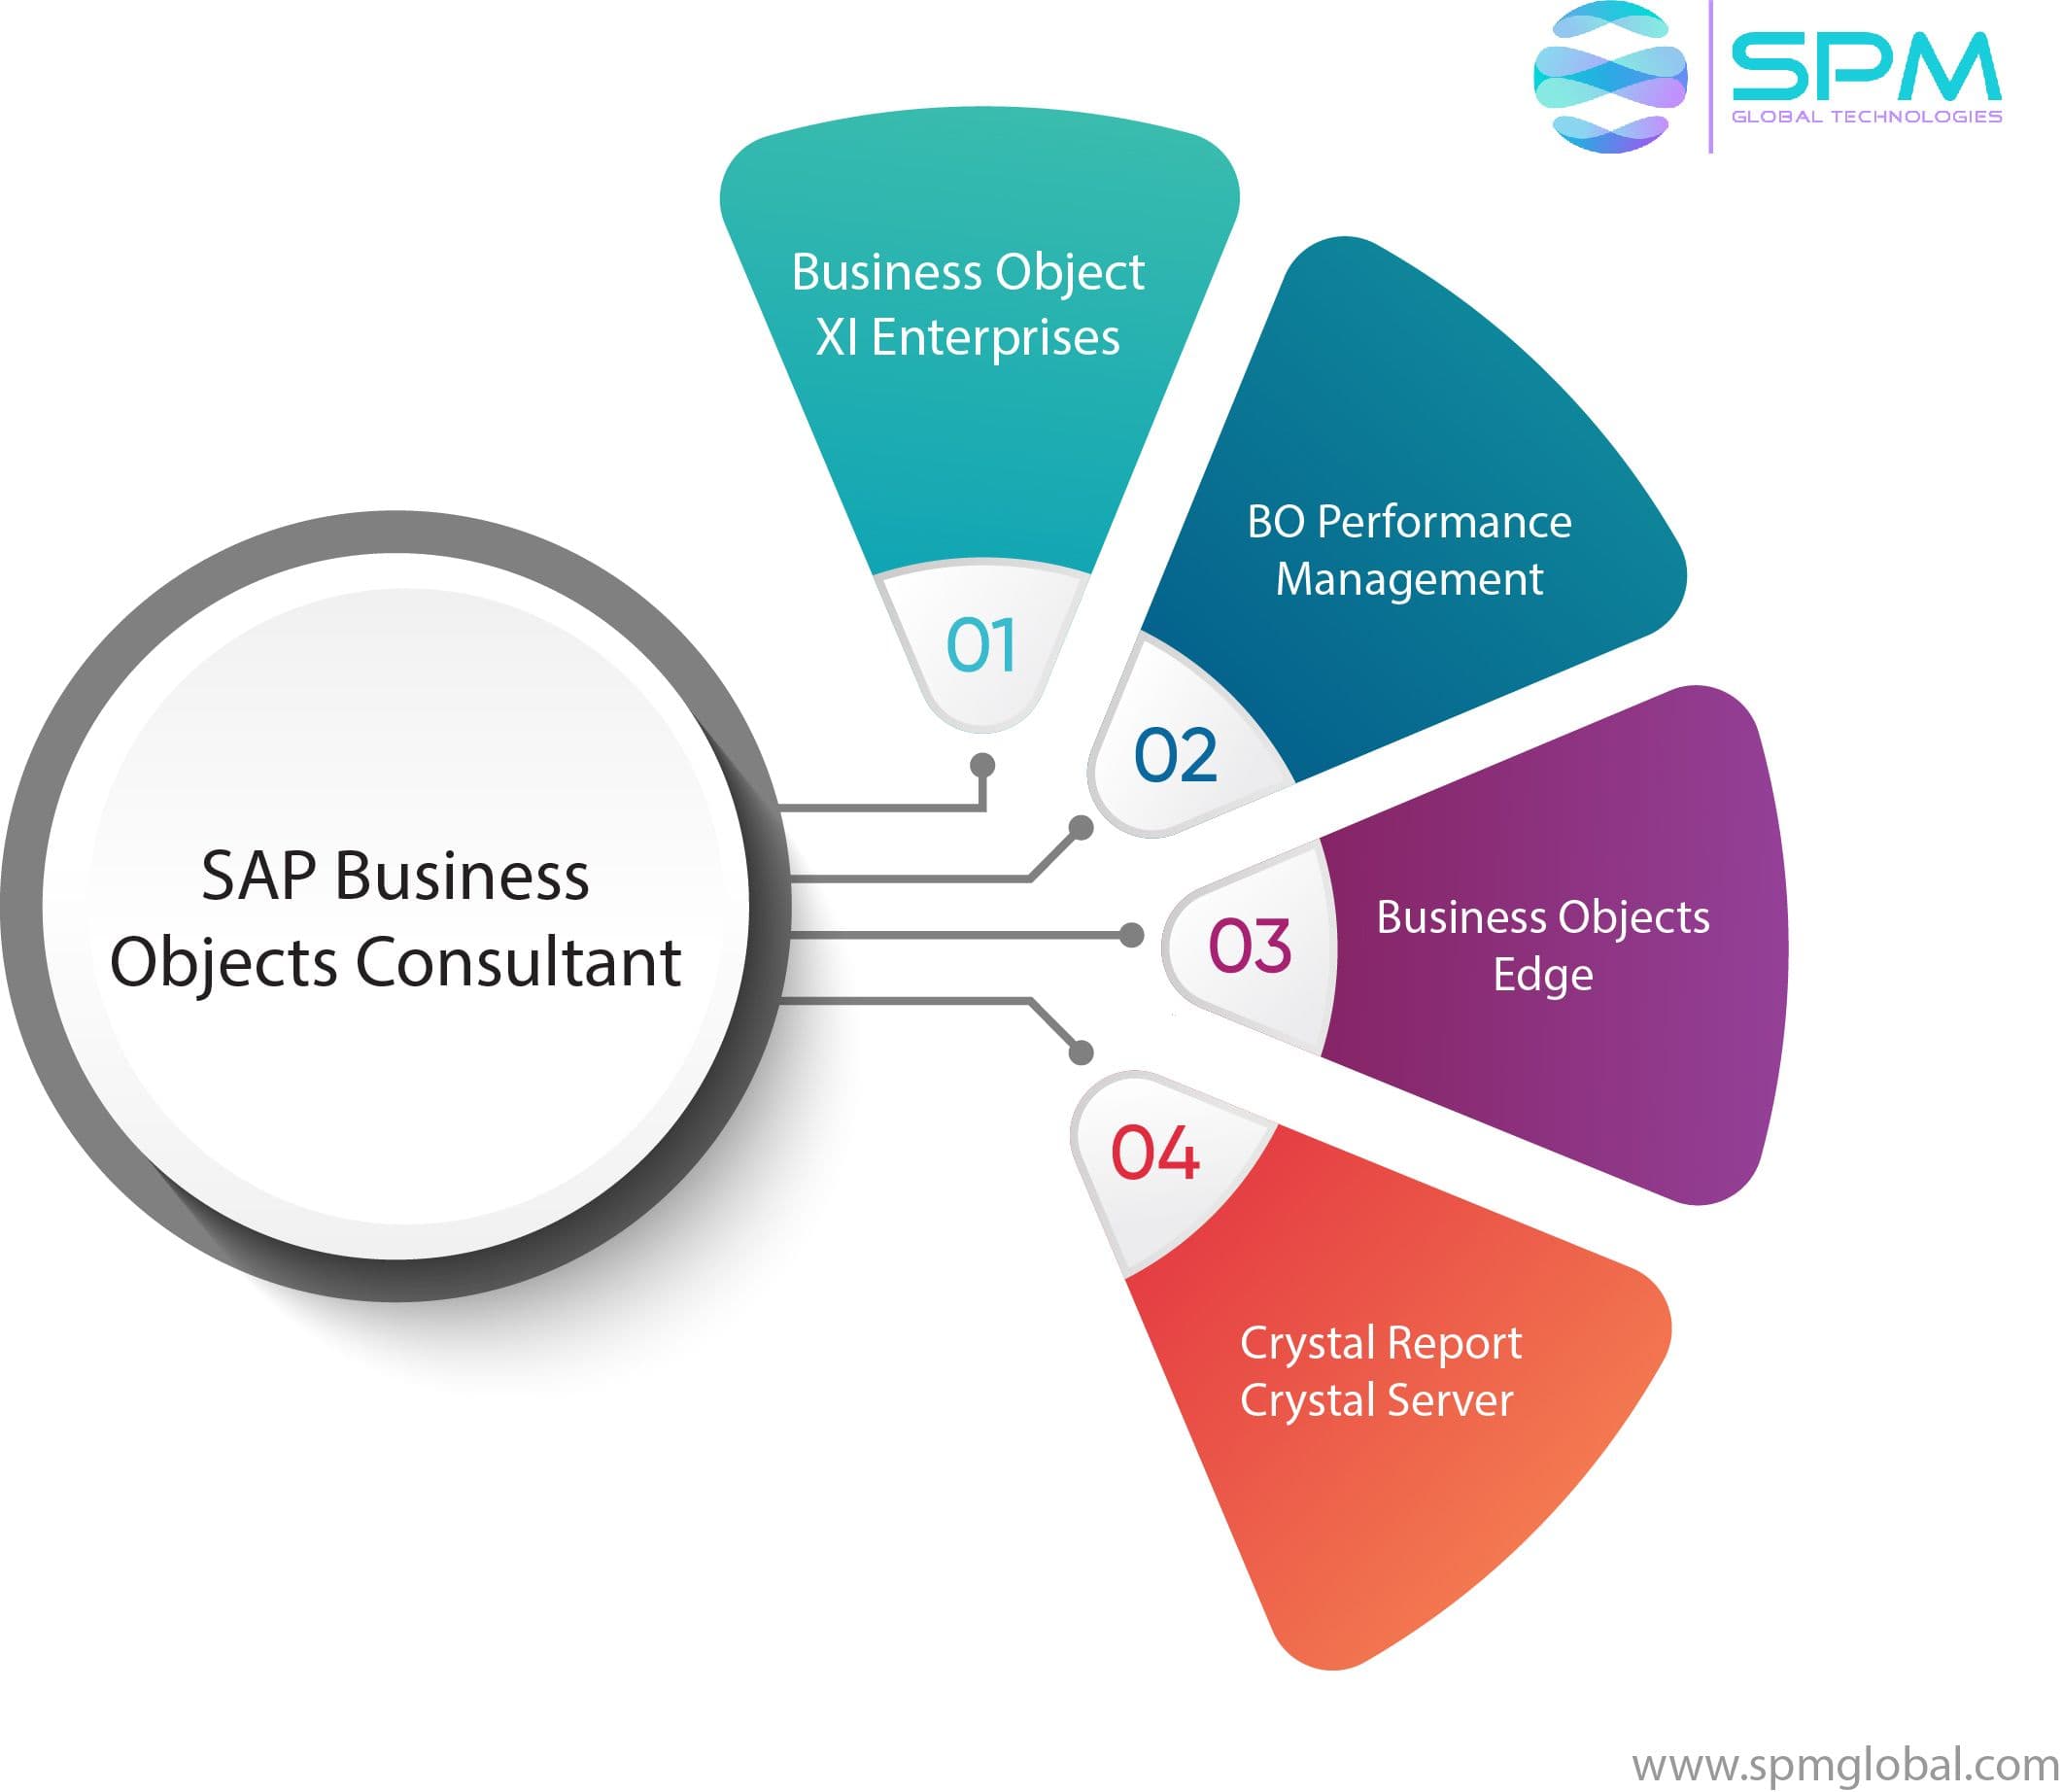 SAP Business objects Service Providers